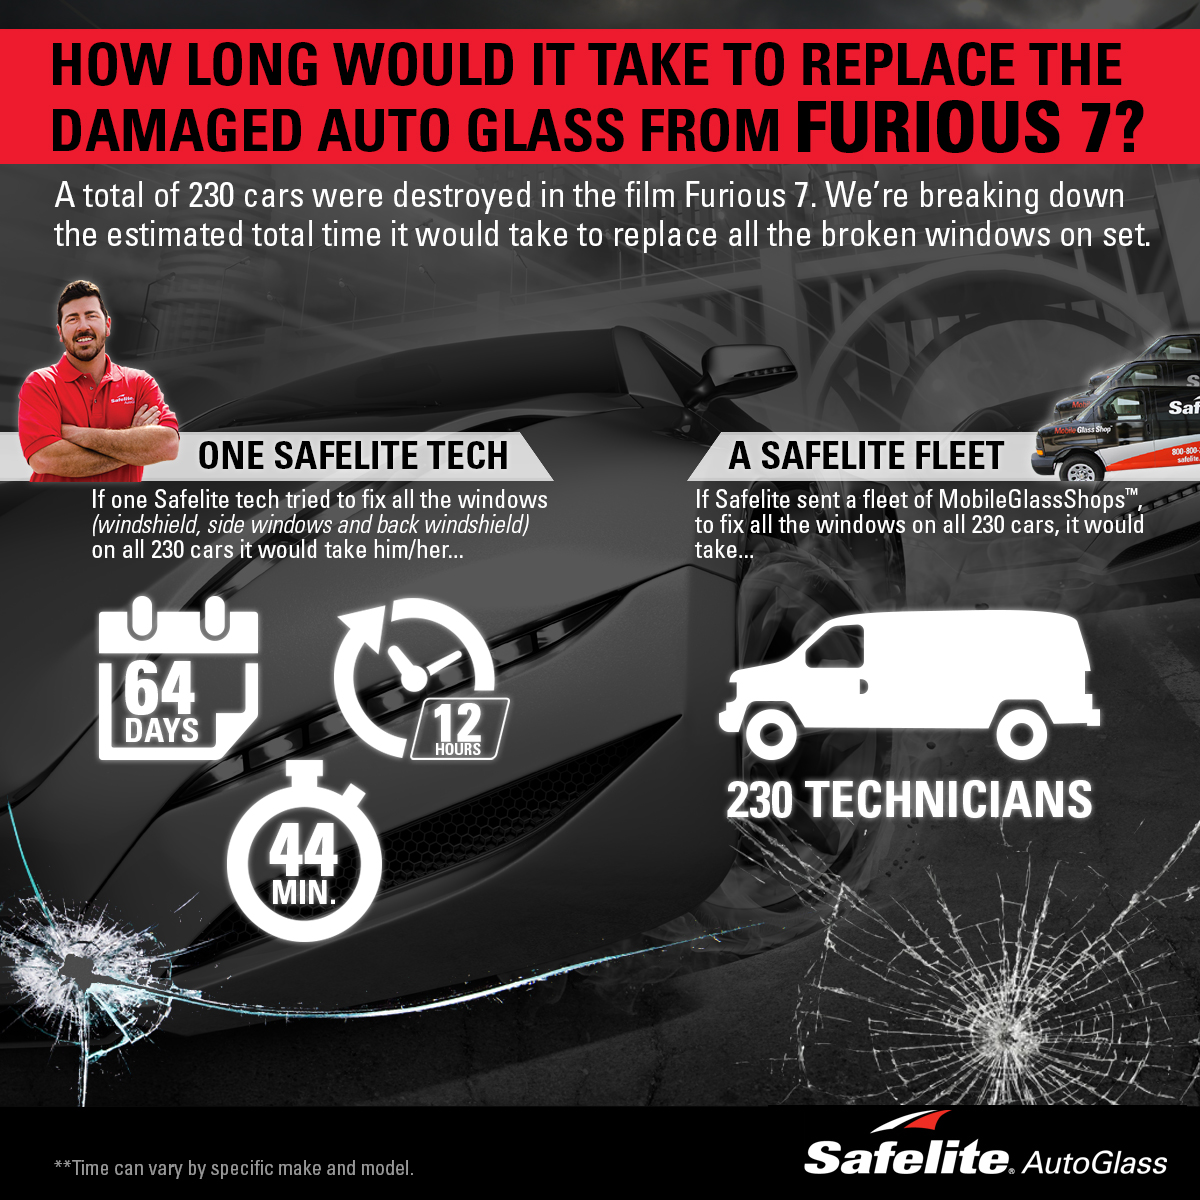 Can you imagine how long it would take to replace all 230 cars from the new movie Furious 7? Safelite calcuated the time it would take to replace all broken windows on set.